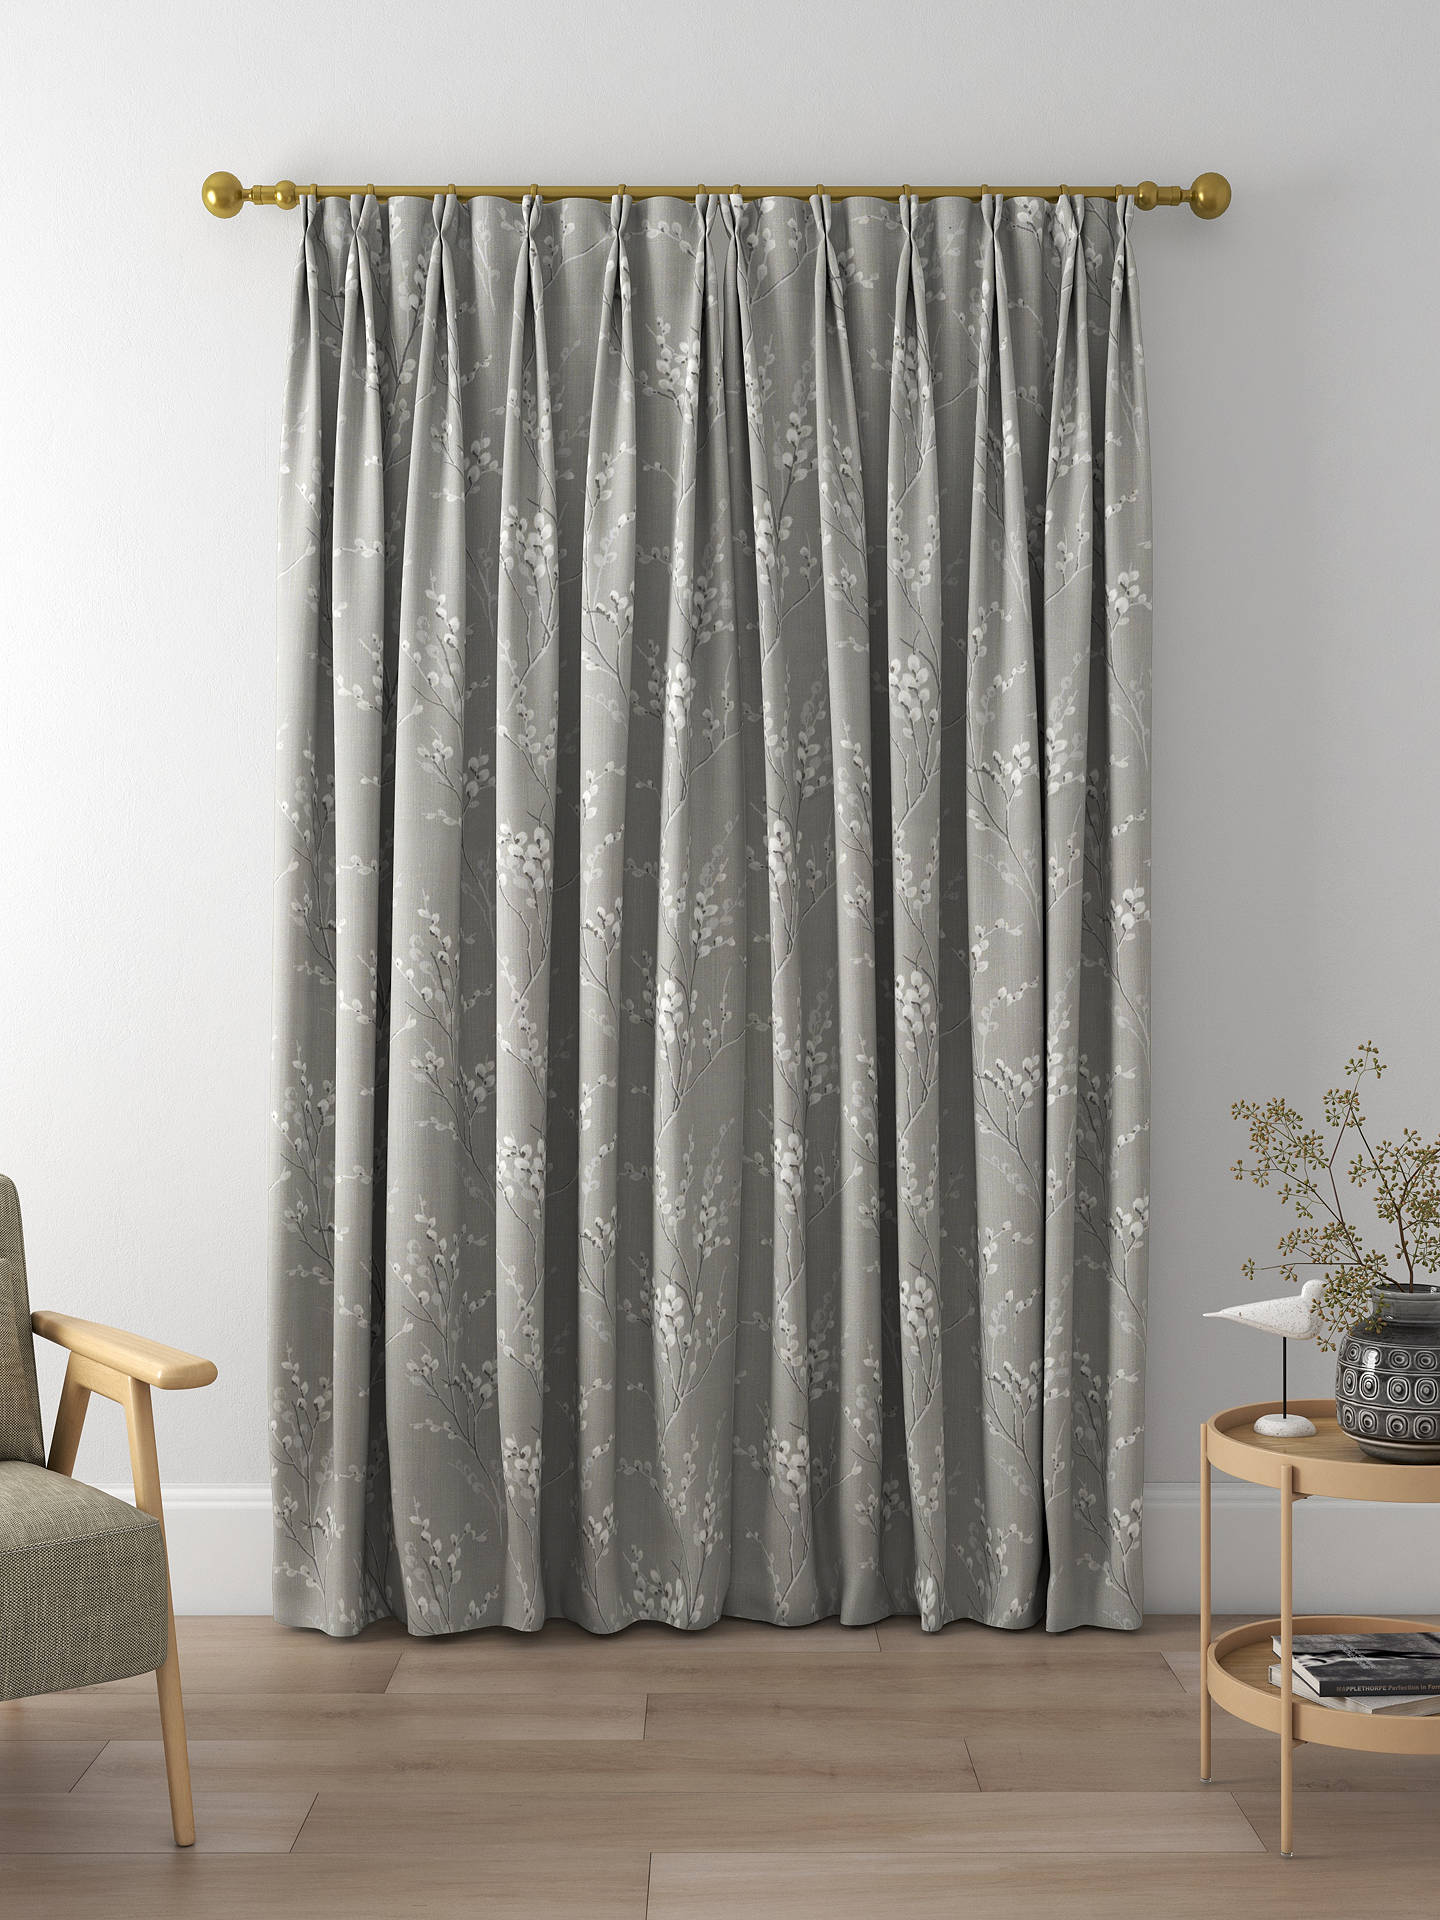 Laura Ashley Pussy Willow Made to Measure Curtains, Steel